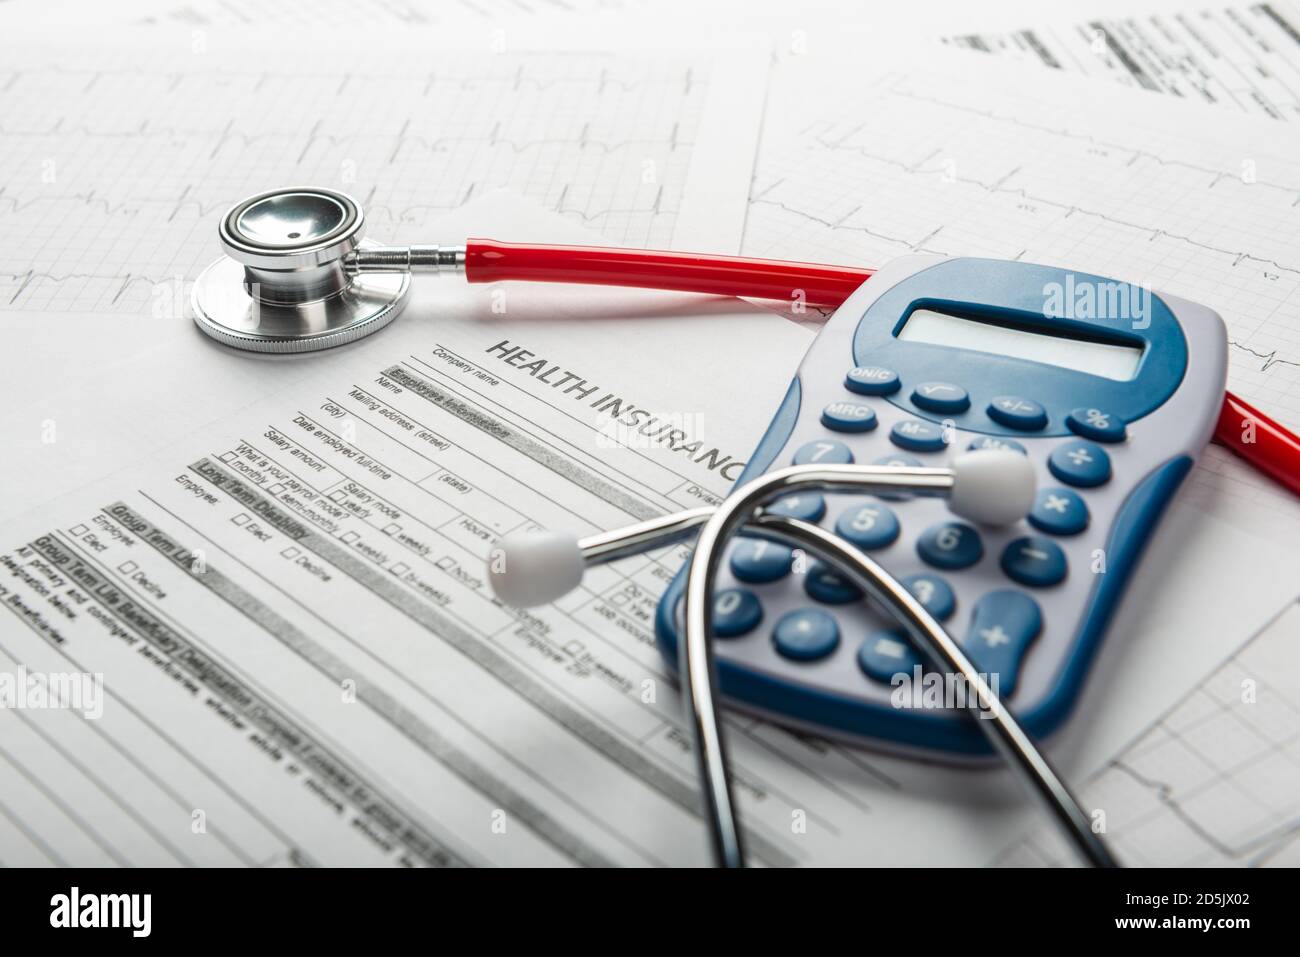 Stethoscope and calculator symbol for health care costs or medical insurance Stock Photo